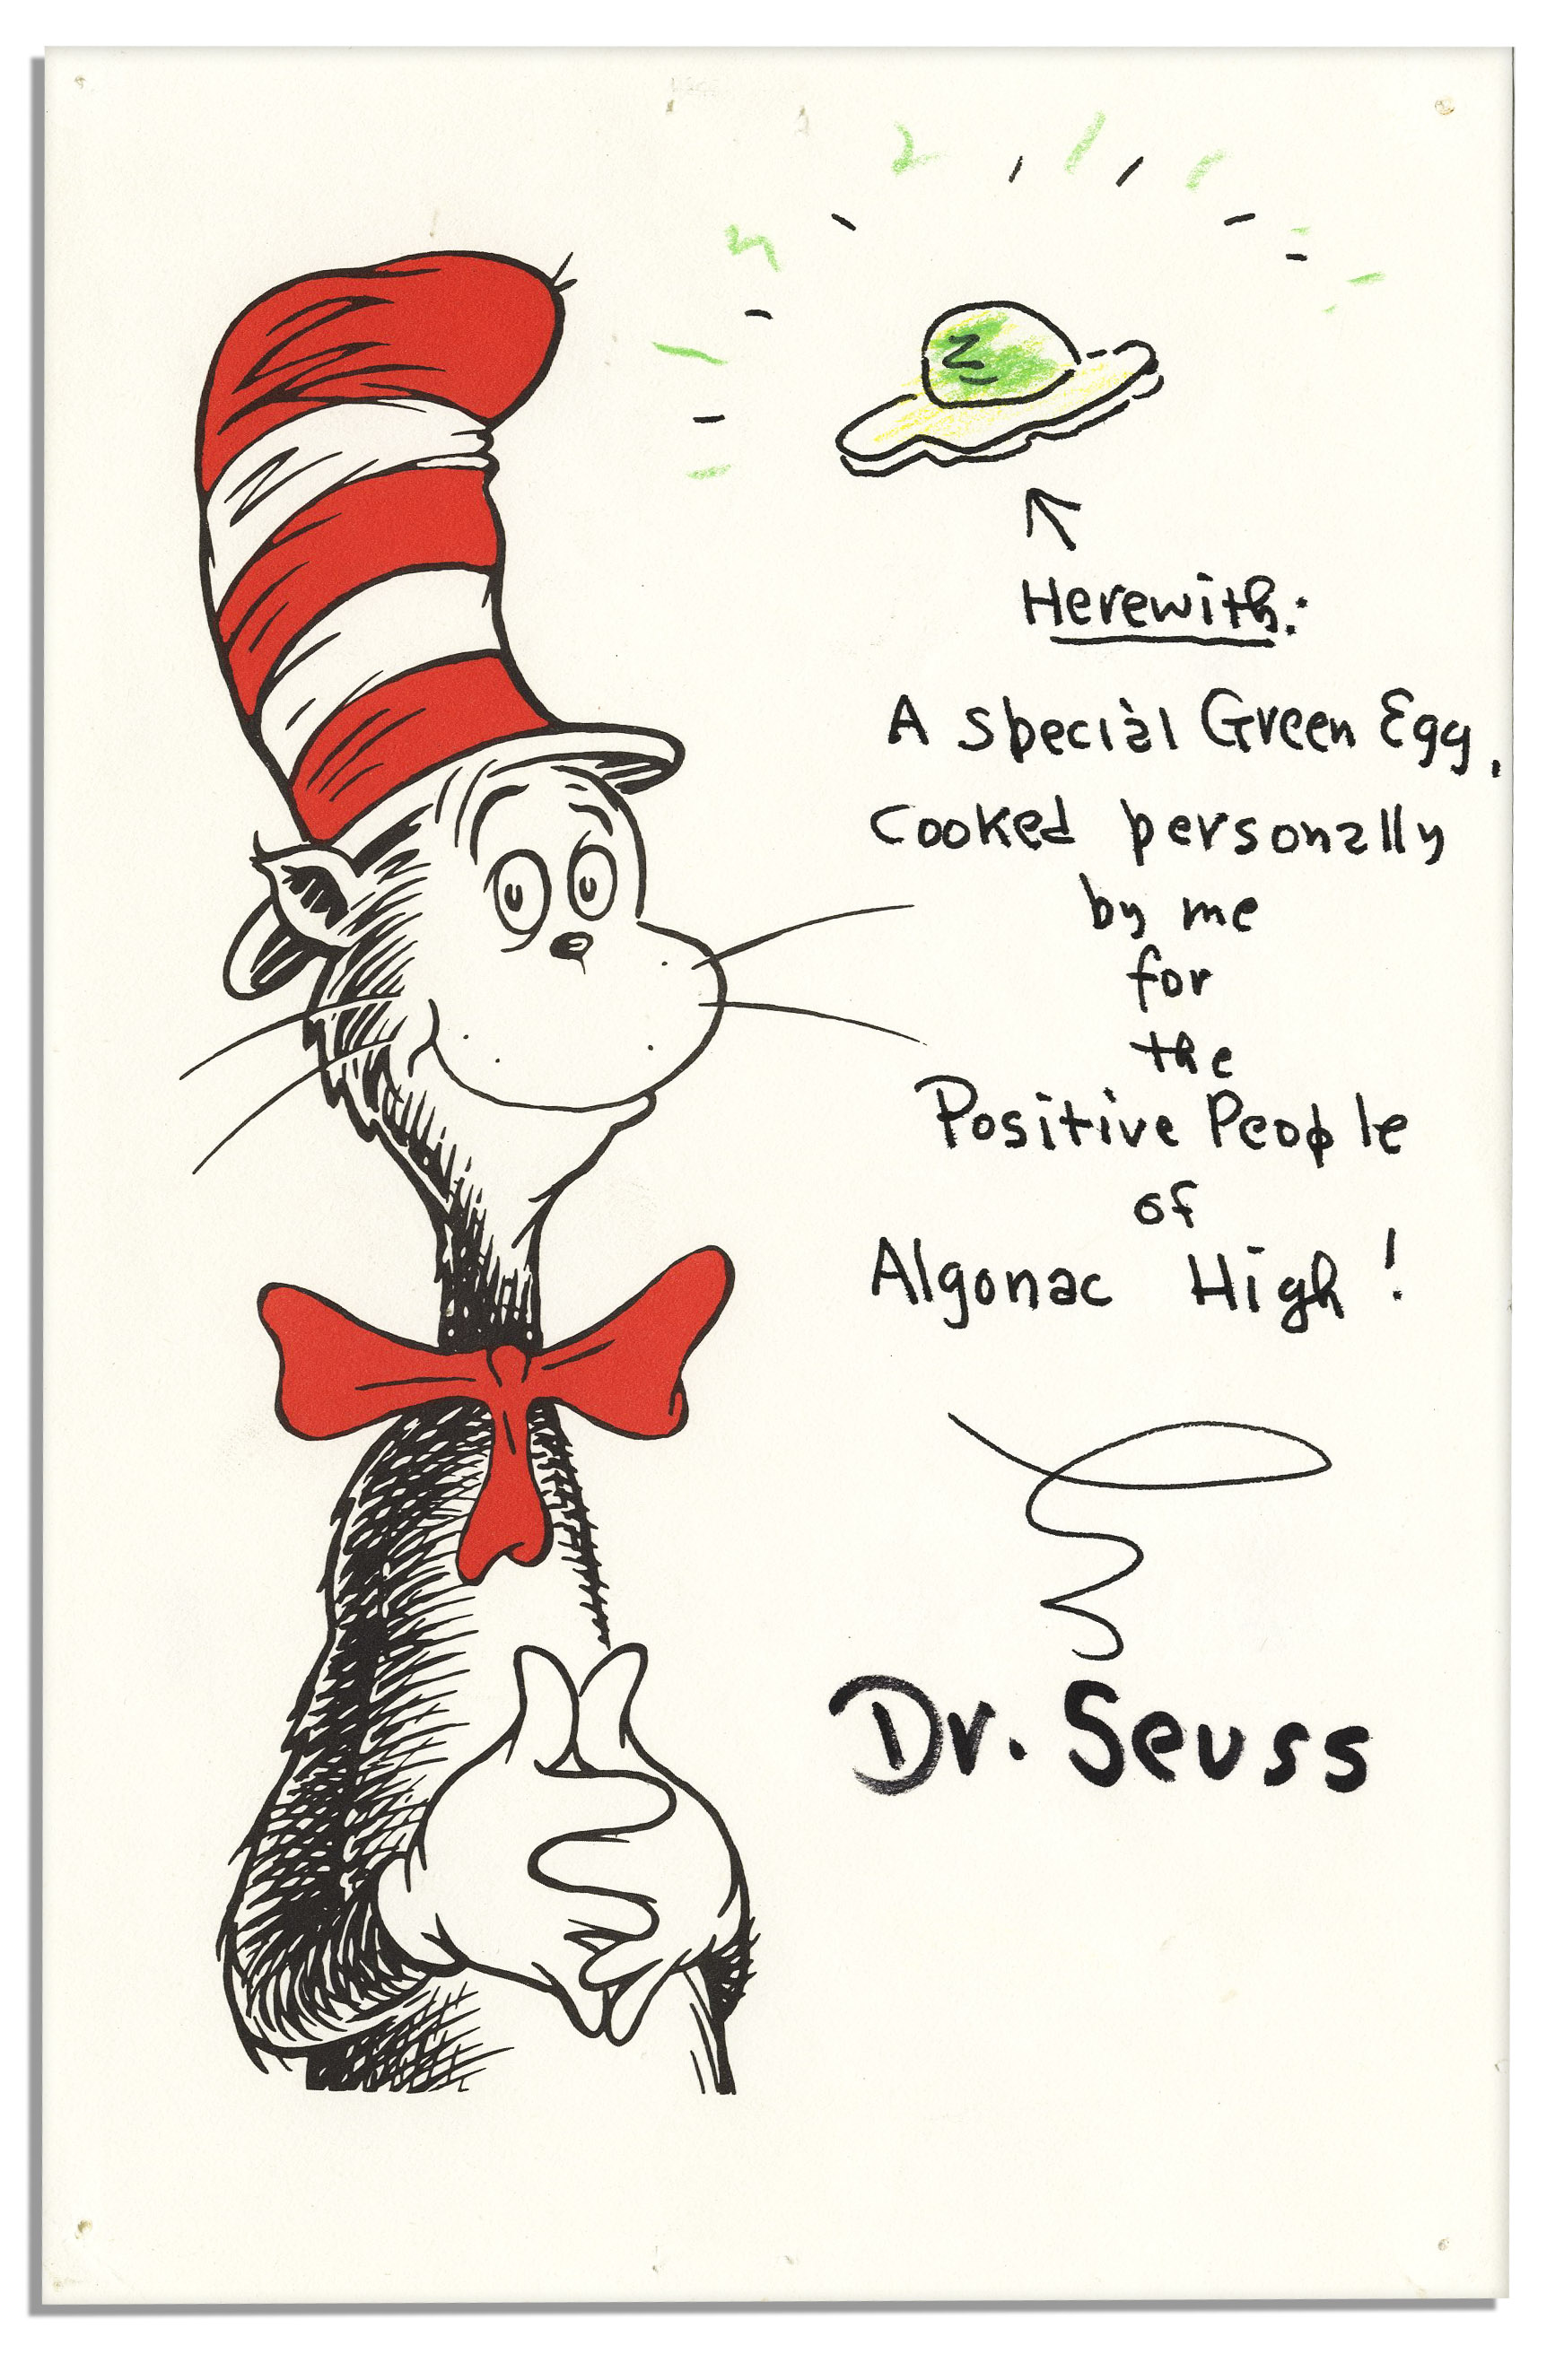 Dr. Seuss Autograph Dr. Seuss Original Art Signed -- Depicting His Famous Green Egg From ''Green Eggs and Ham''